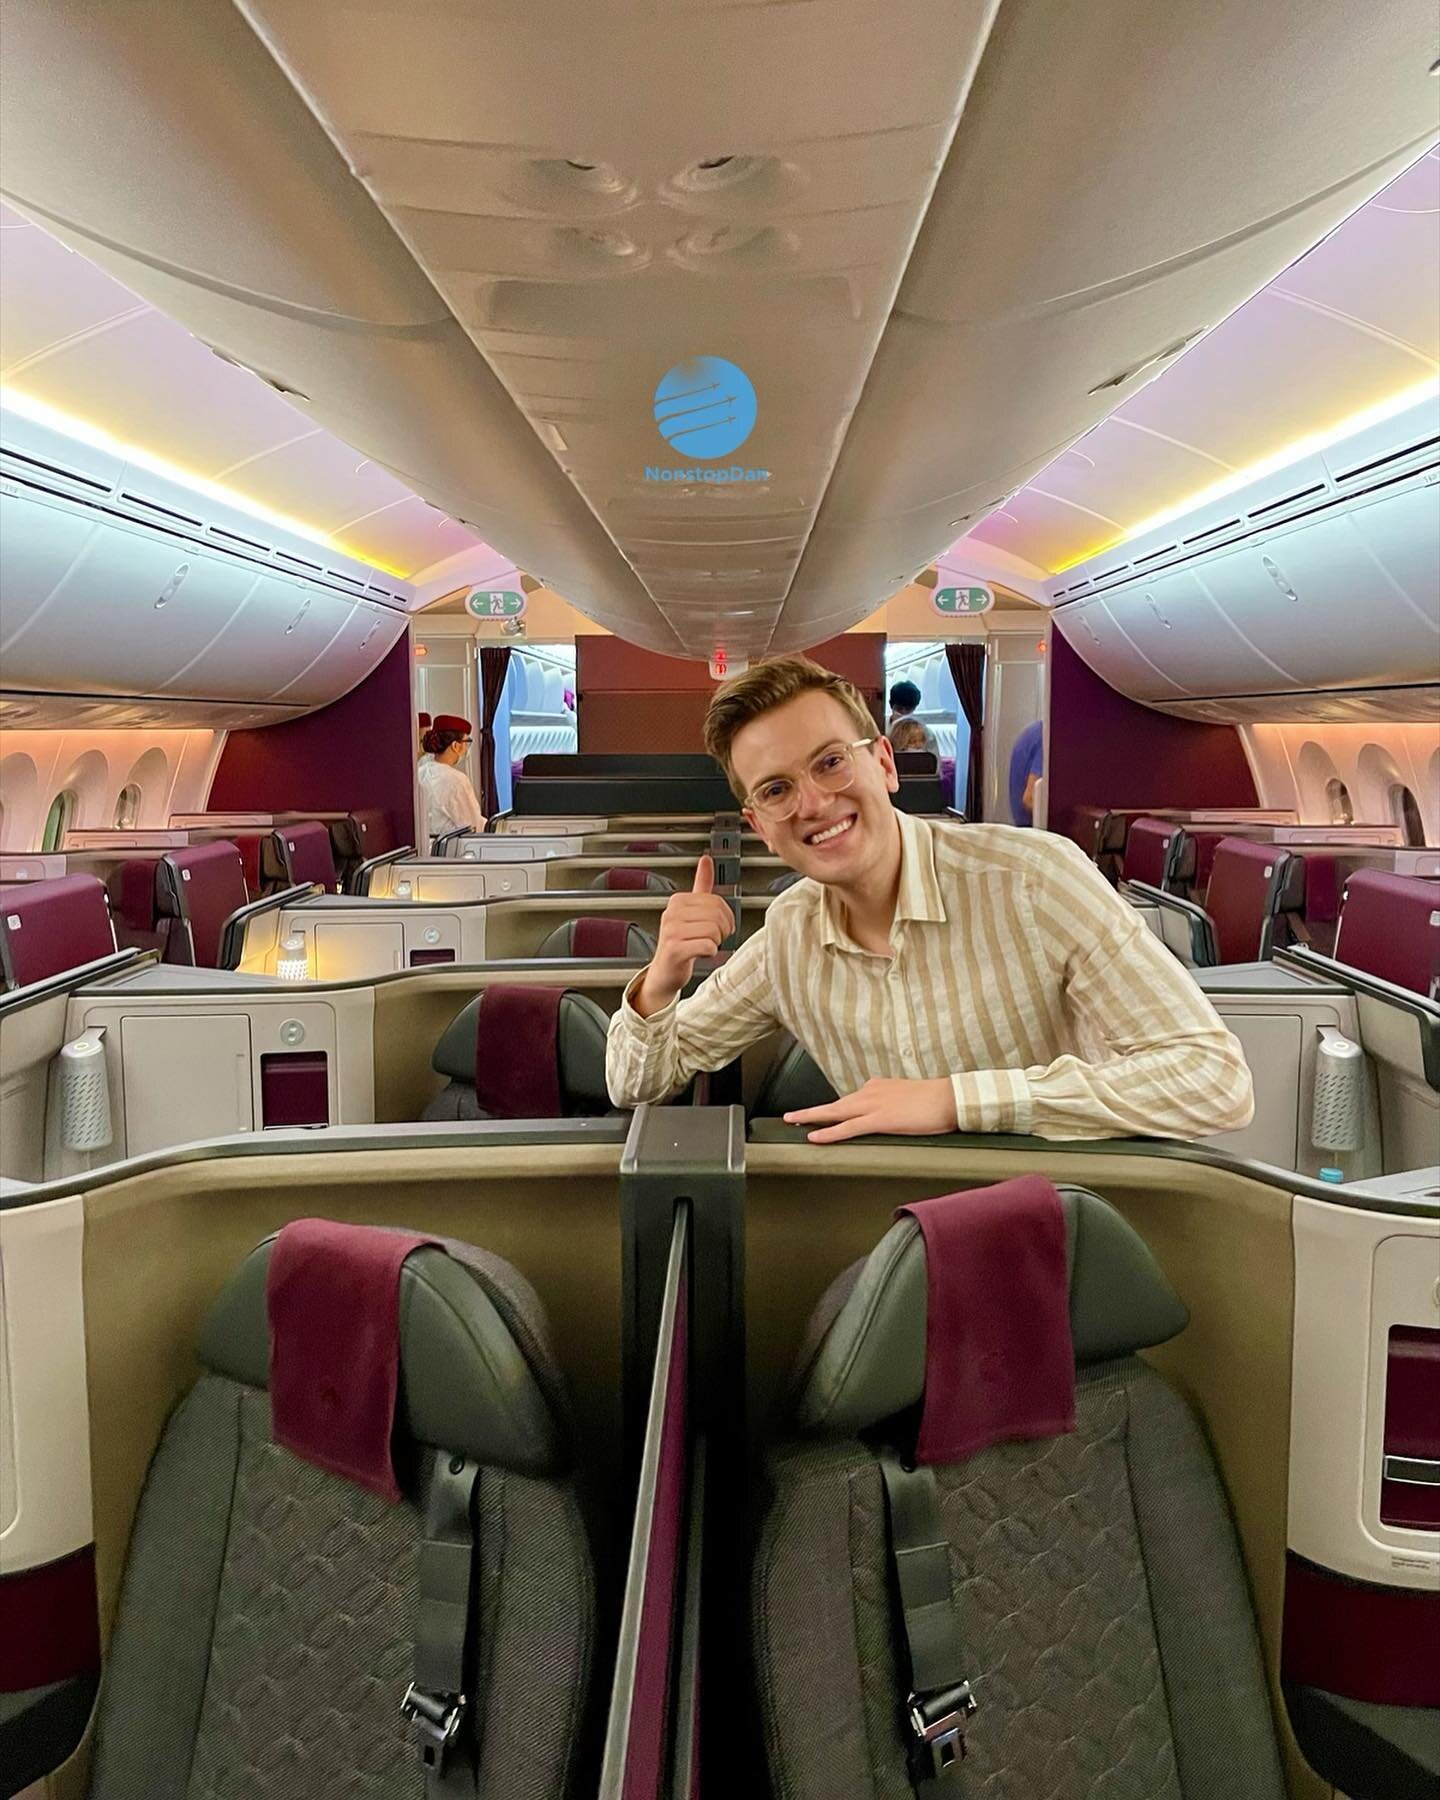 What are your thoughts on @qatarairways new 787-9 Business Class Suite? Would love to see discussions in the comments on pros and cons. For me, this is a massive upgrade from the 787-8, and that&rsquo;s enough to make me happy😆